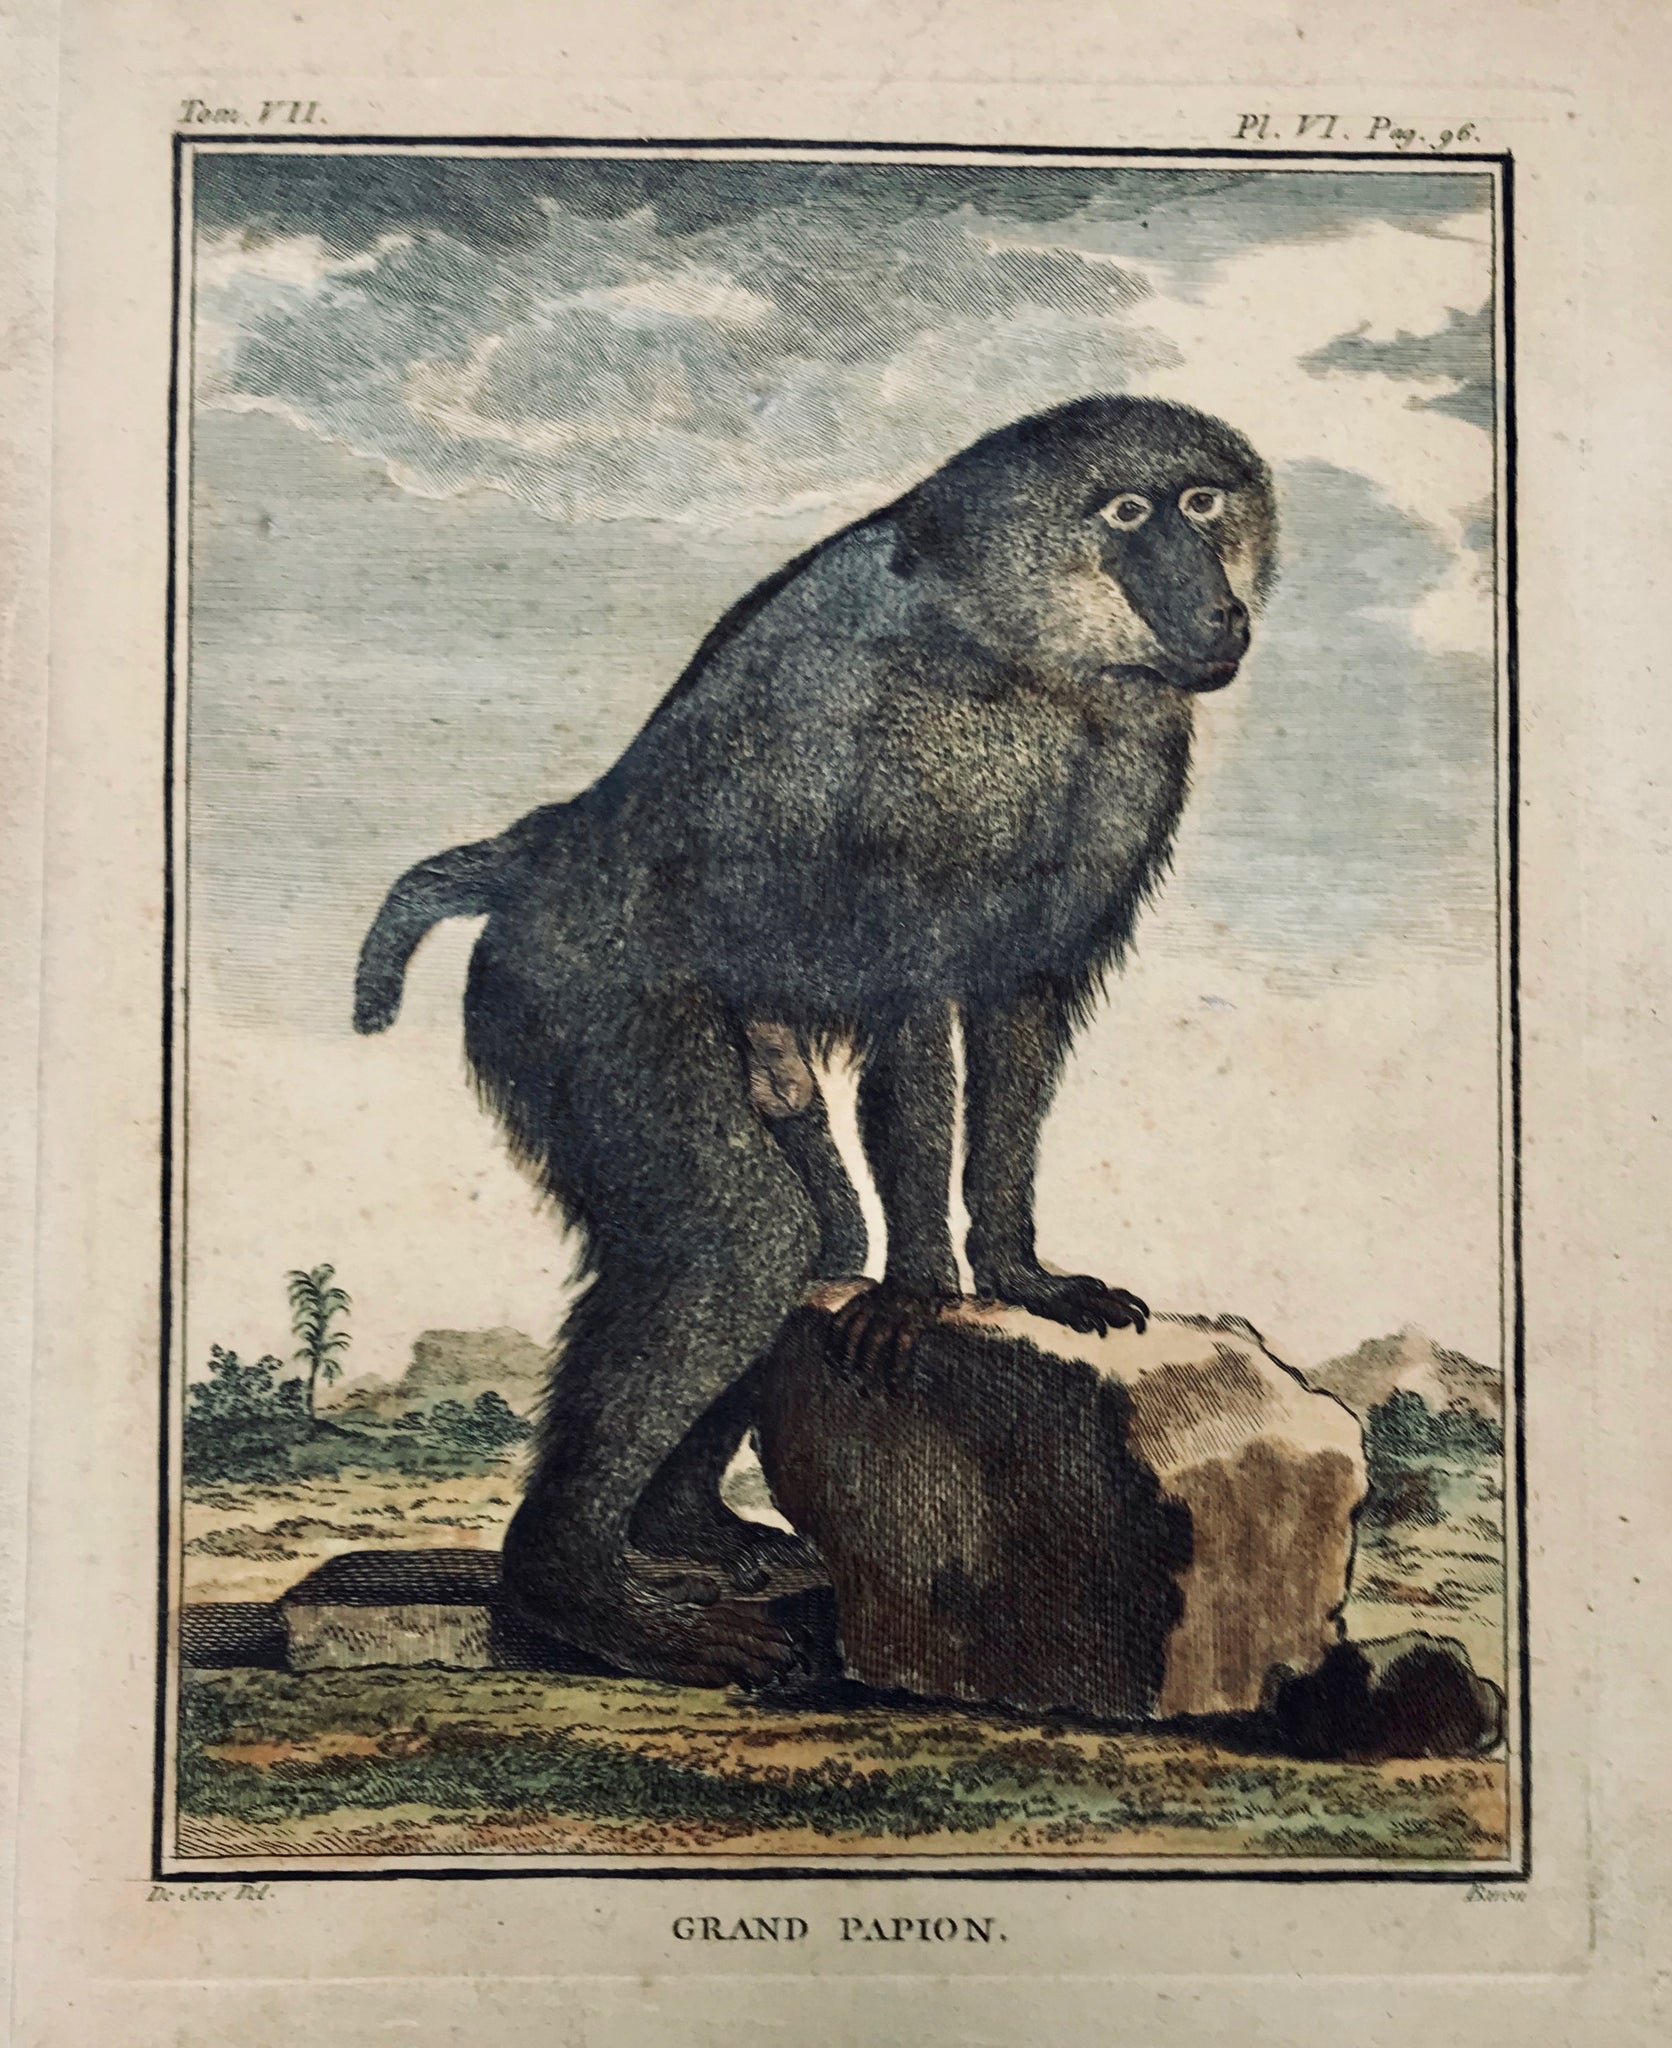 Grand Papion  Copper etching by Baron after De Seve from "Histoire Naturelle", published 1751 in Paris. Modern hand coloring. Left margin has been widened.